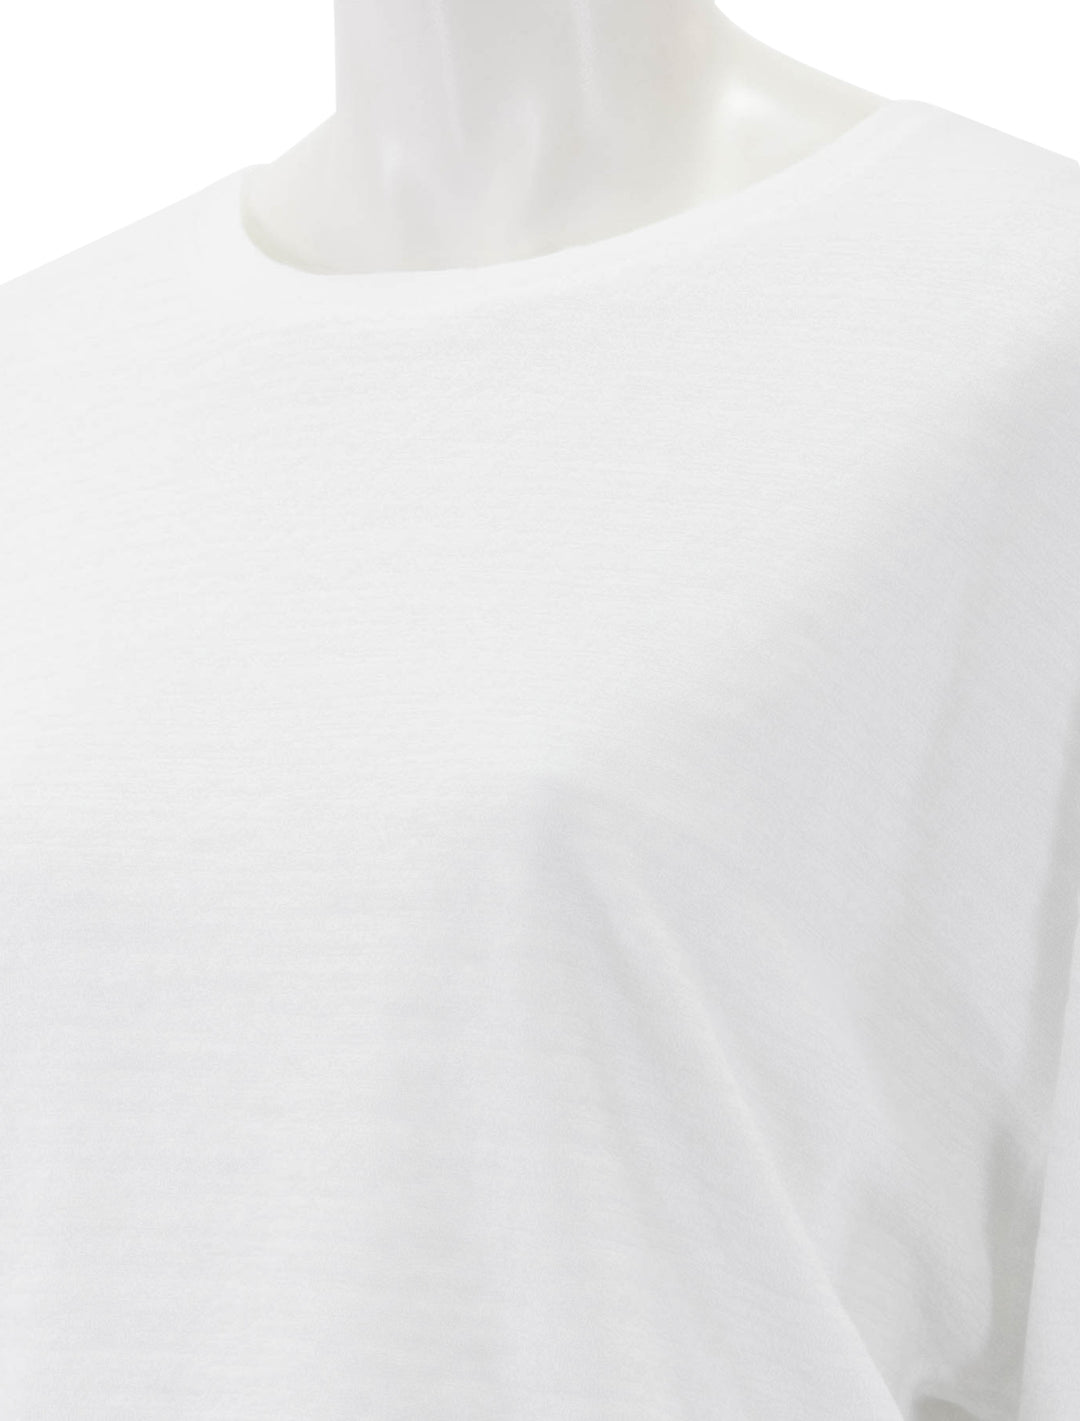 Close-up view of AMO's easy sweatshirt in white.